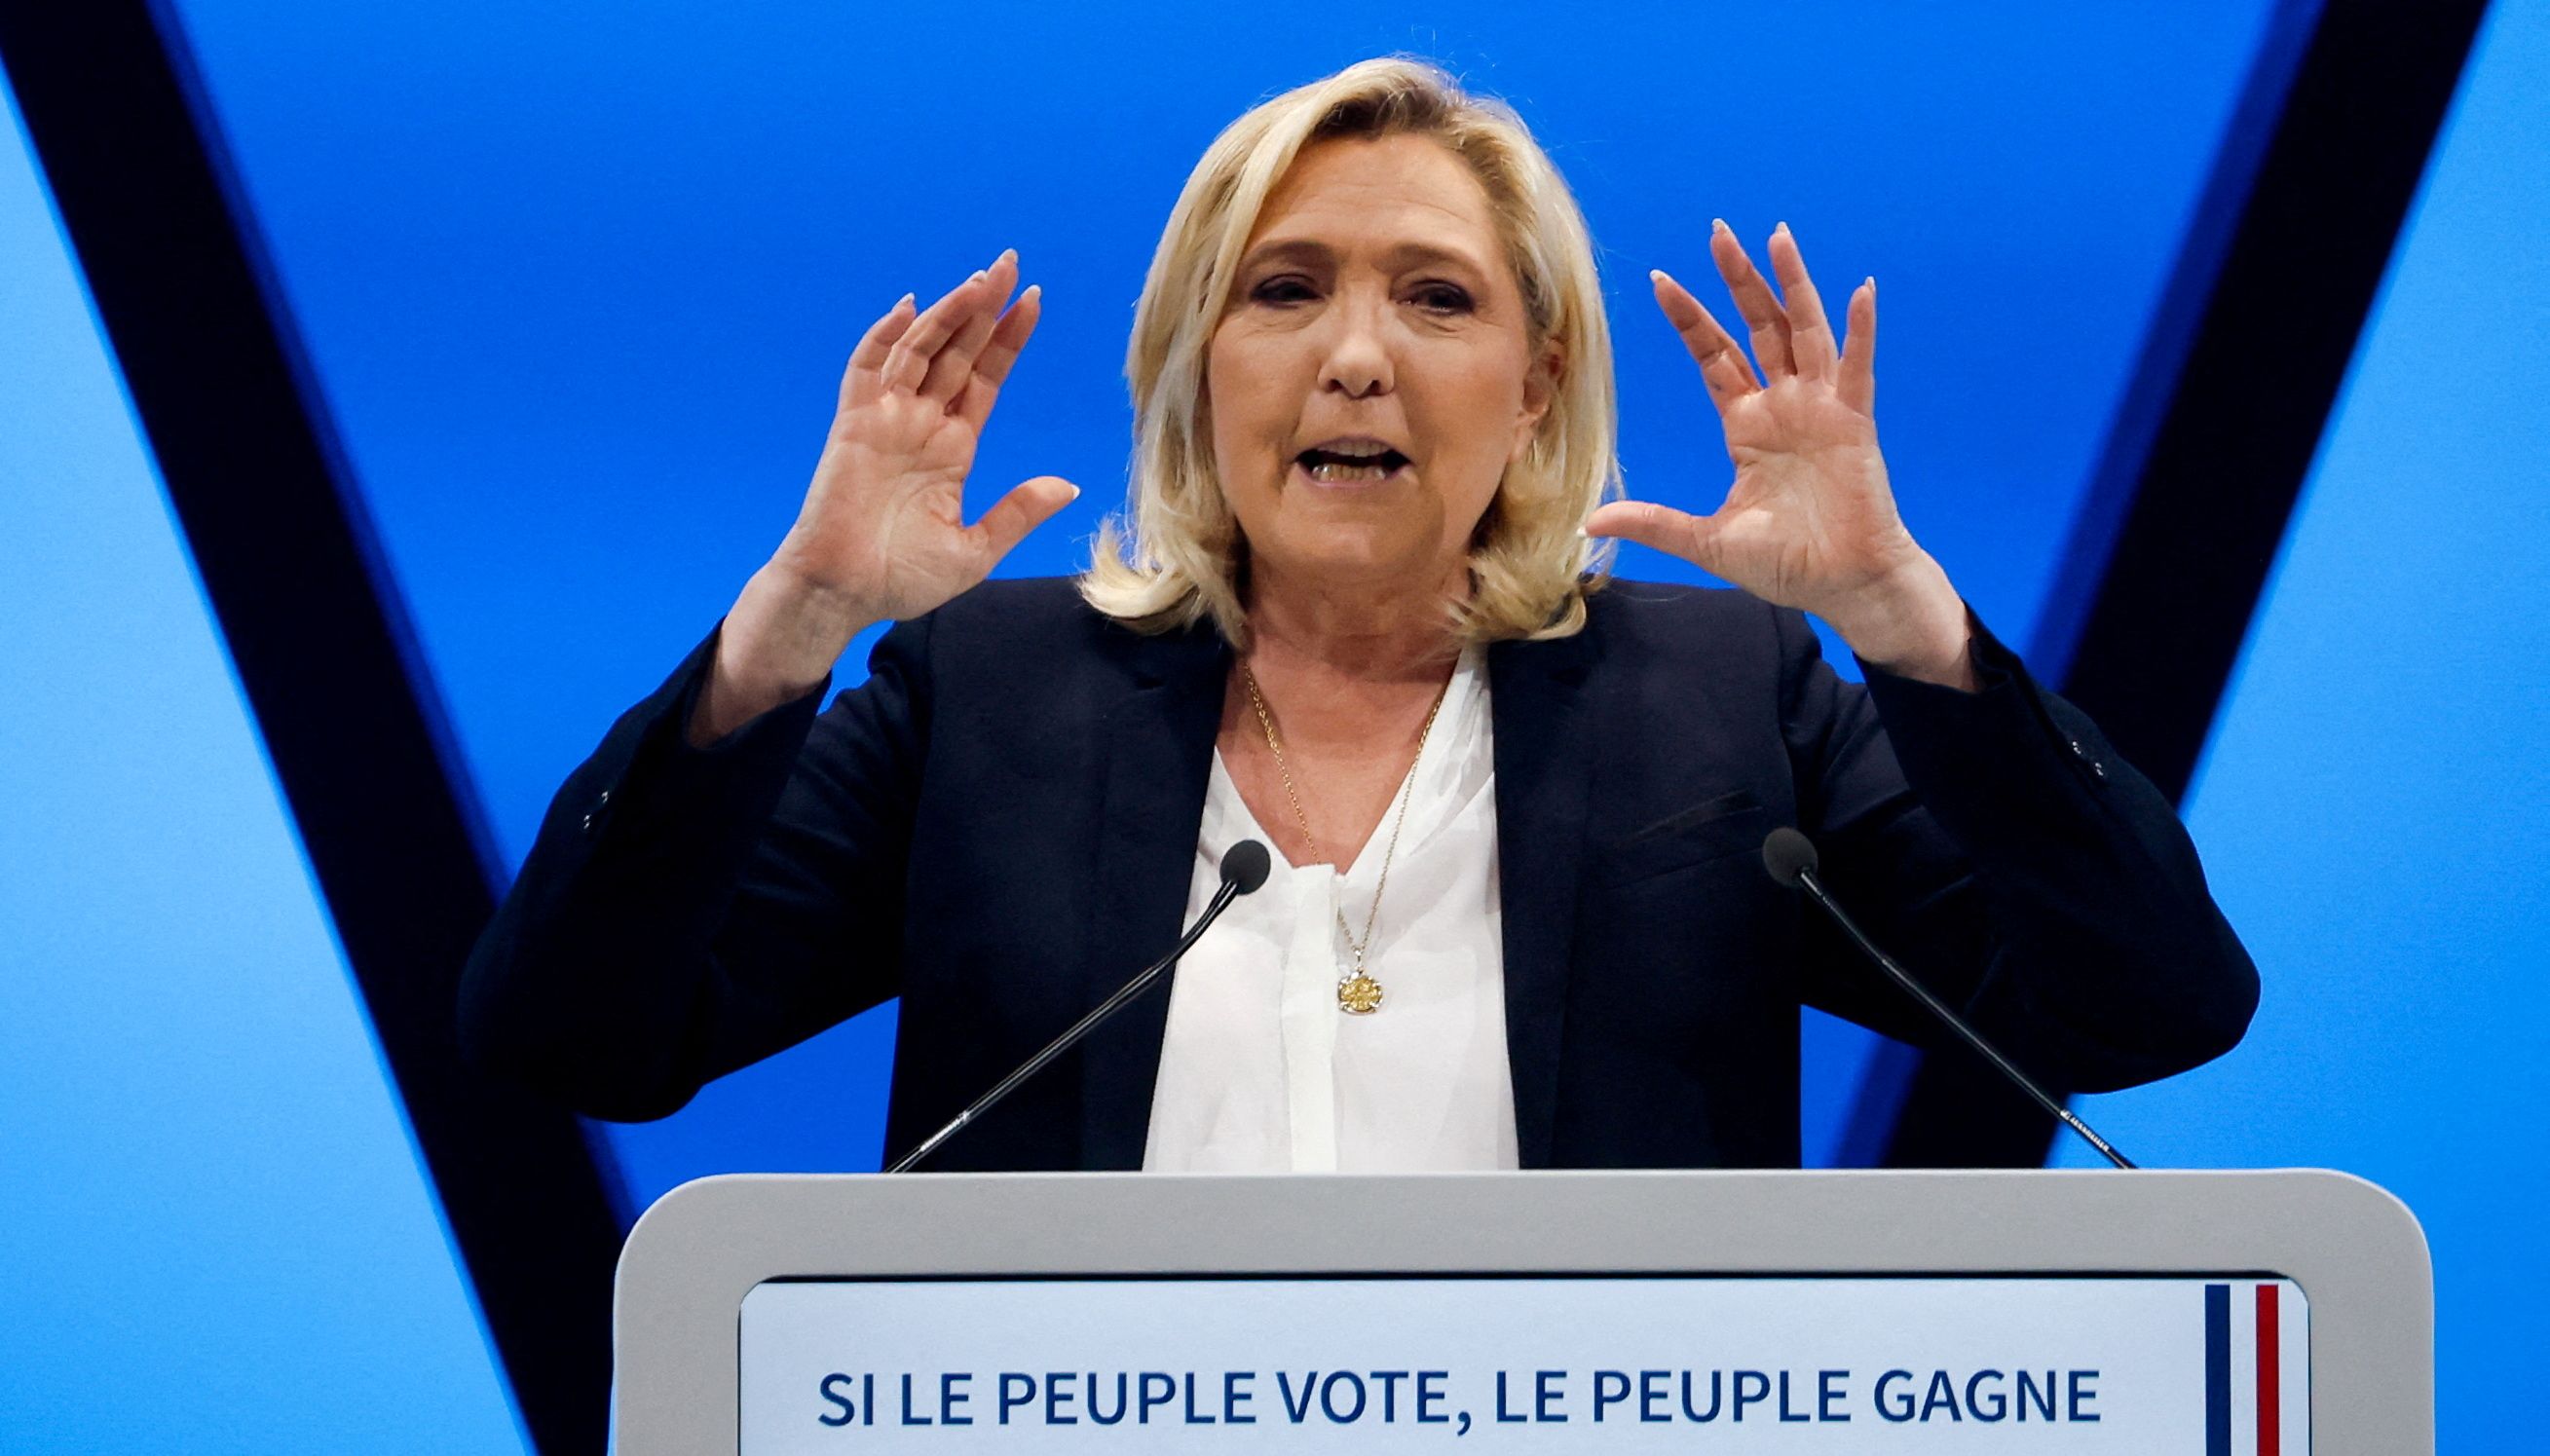 Marine Le Pen, leader of French far-right National Rally (Rassemblement National) party and candidate for the 2022 French presidential election, speaks during a political campaign rally in Perpignan, France, April 7, 2022. REUTERS/Albert Gea/File Photo